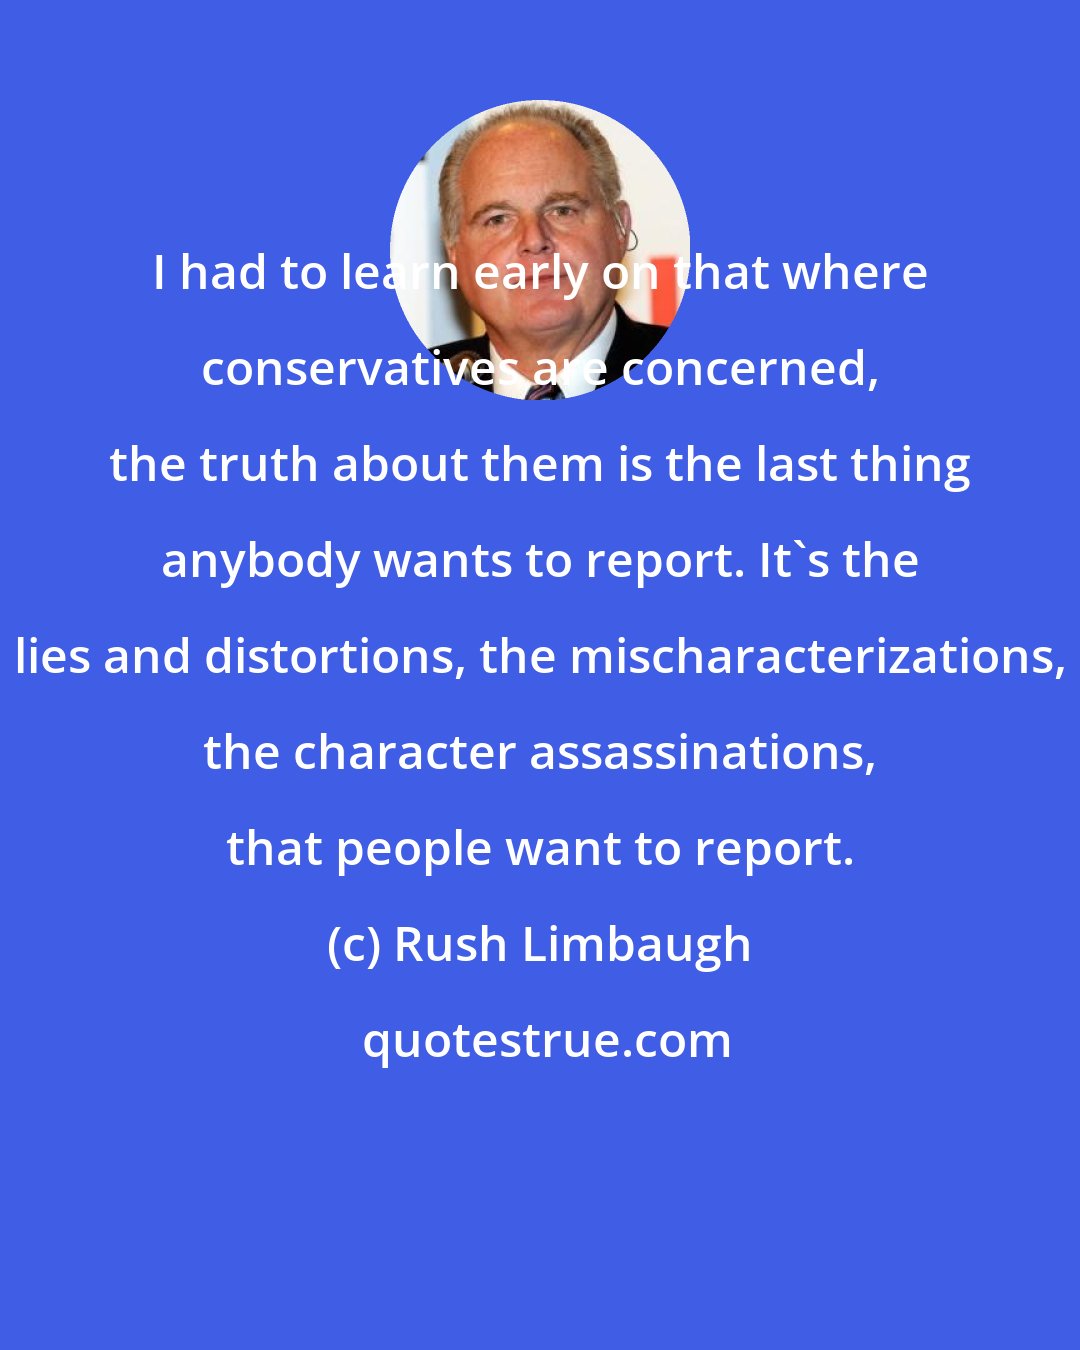 Rush Limbaugh: I had to learn early on that where conservatives are concerned, the truth about them is the last thing anybody wants to report. It's the lies and distortions, the mischaracterizations, the character assassinations, that people want to report.